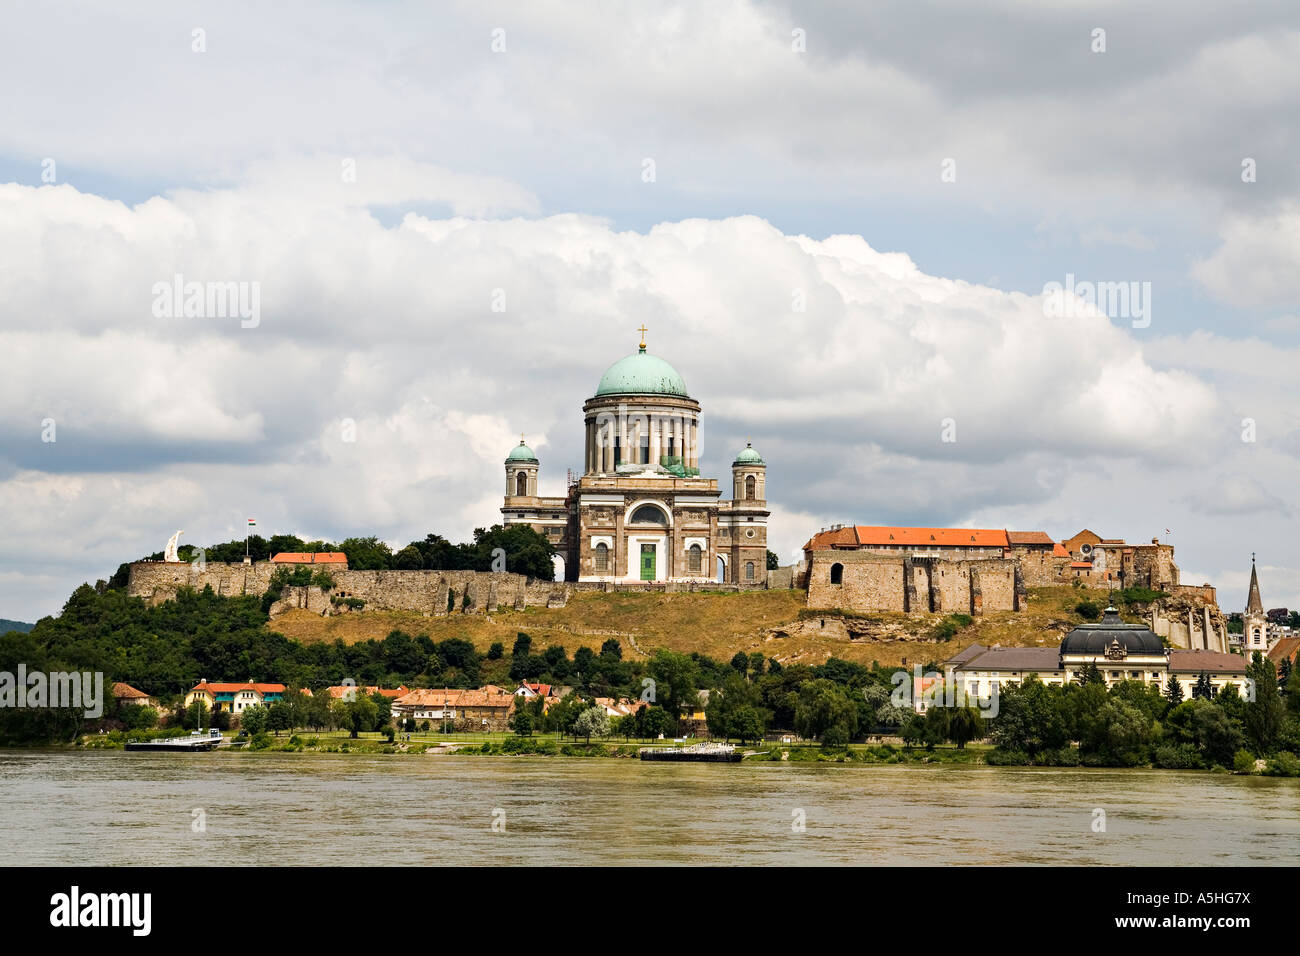 HUNGARY Esztergom View of basilica and dome on Danube River from Sturovo Slovakia largest church in Hungary Stock Photo